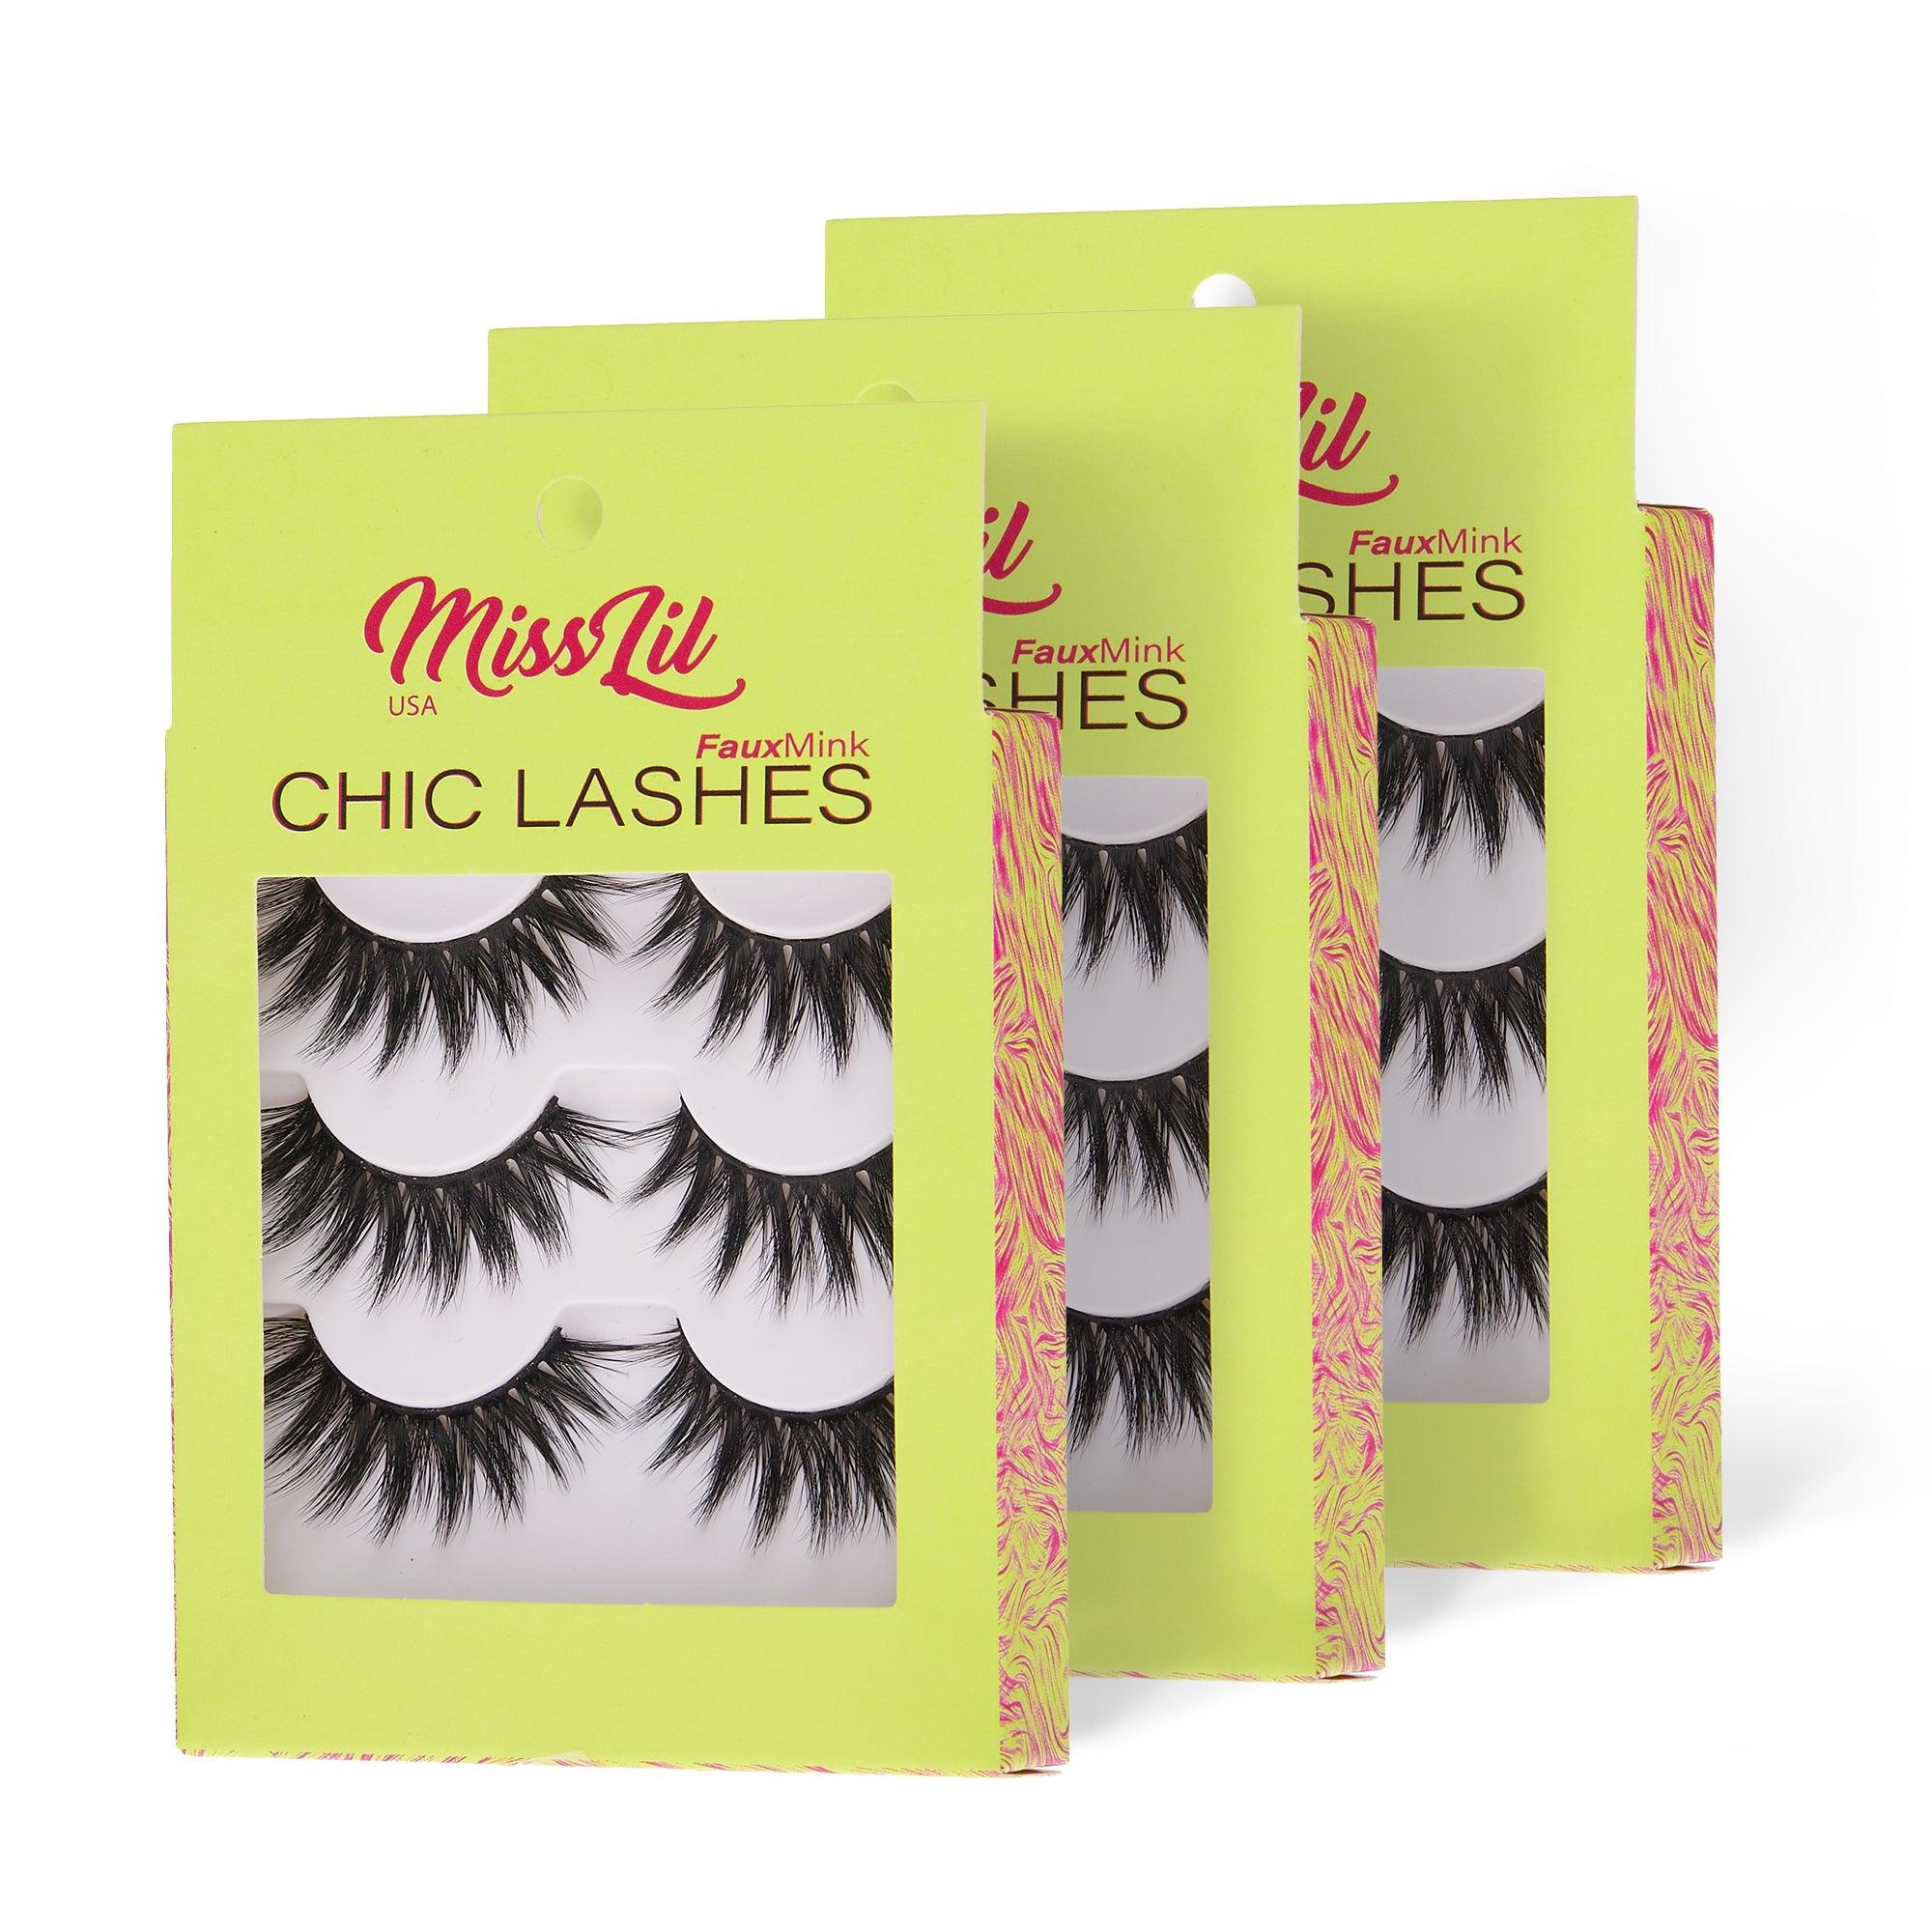 3-Pair Faux Mink Eyelashes - Chic Lashes Collection #5 - Pack of 3 - Miss Lil USA